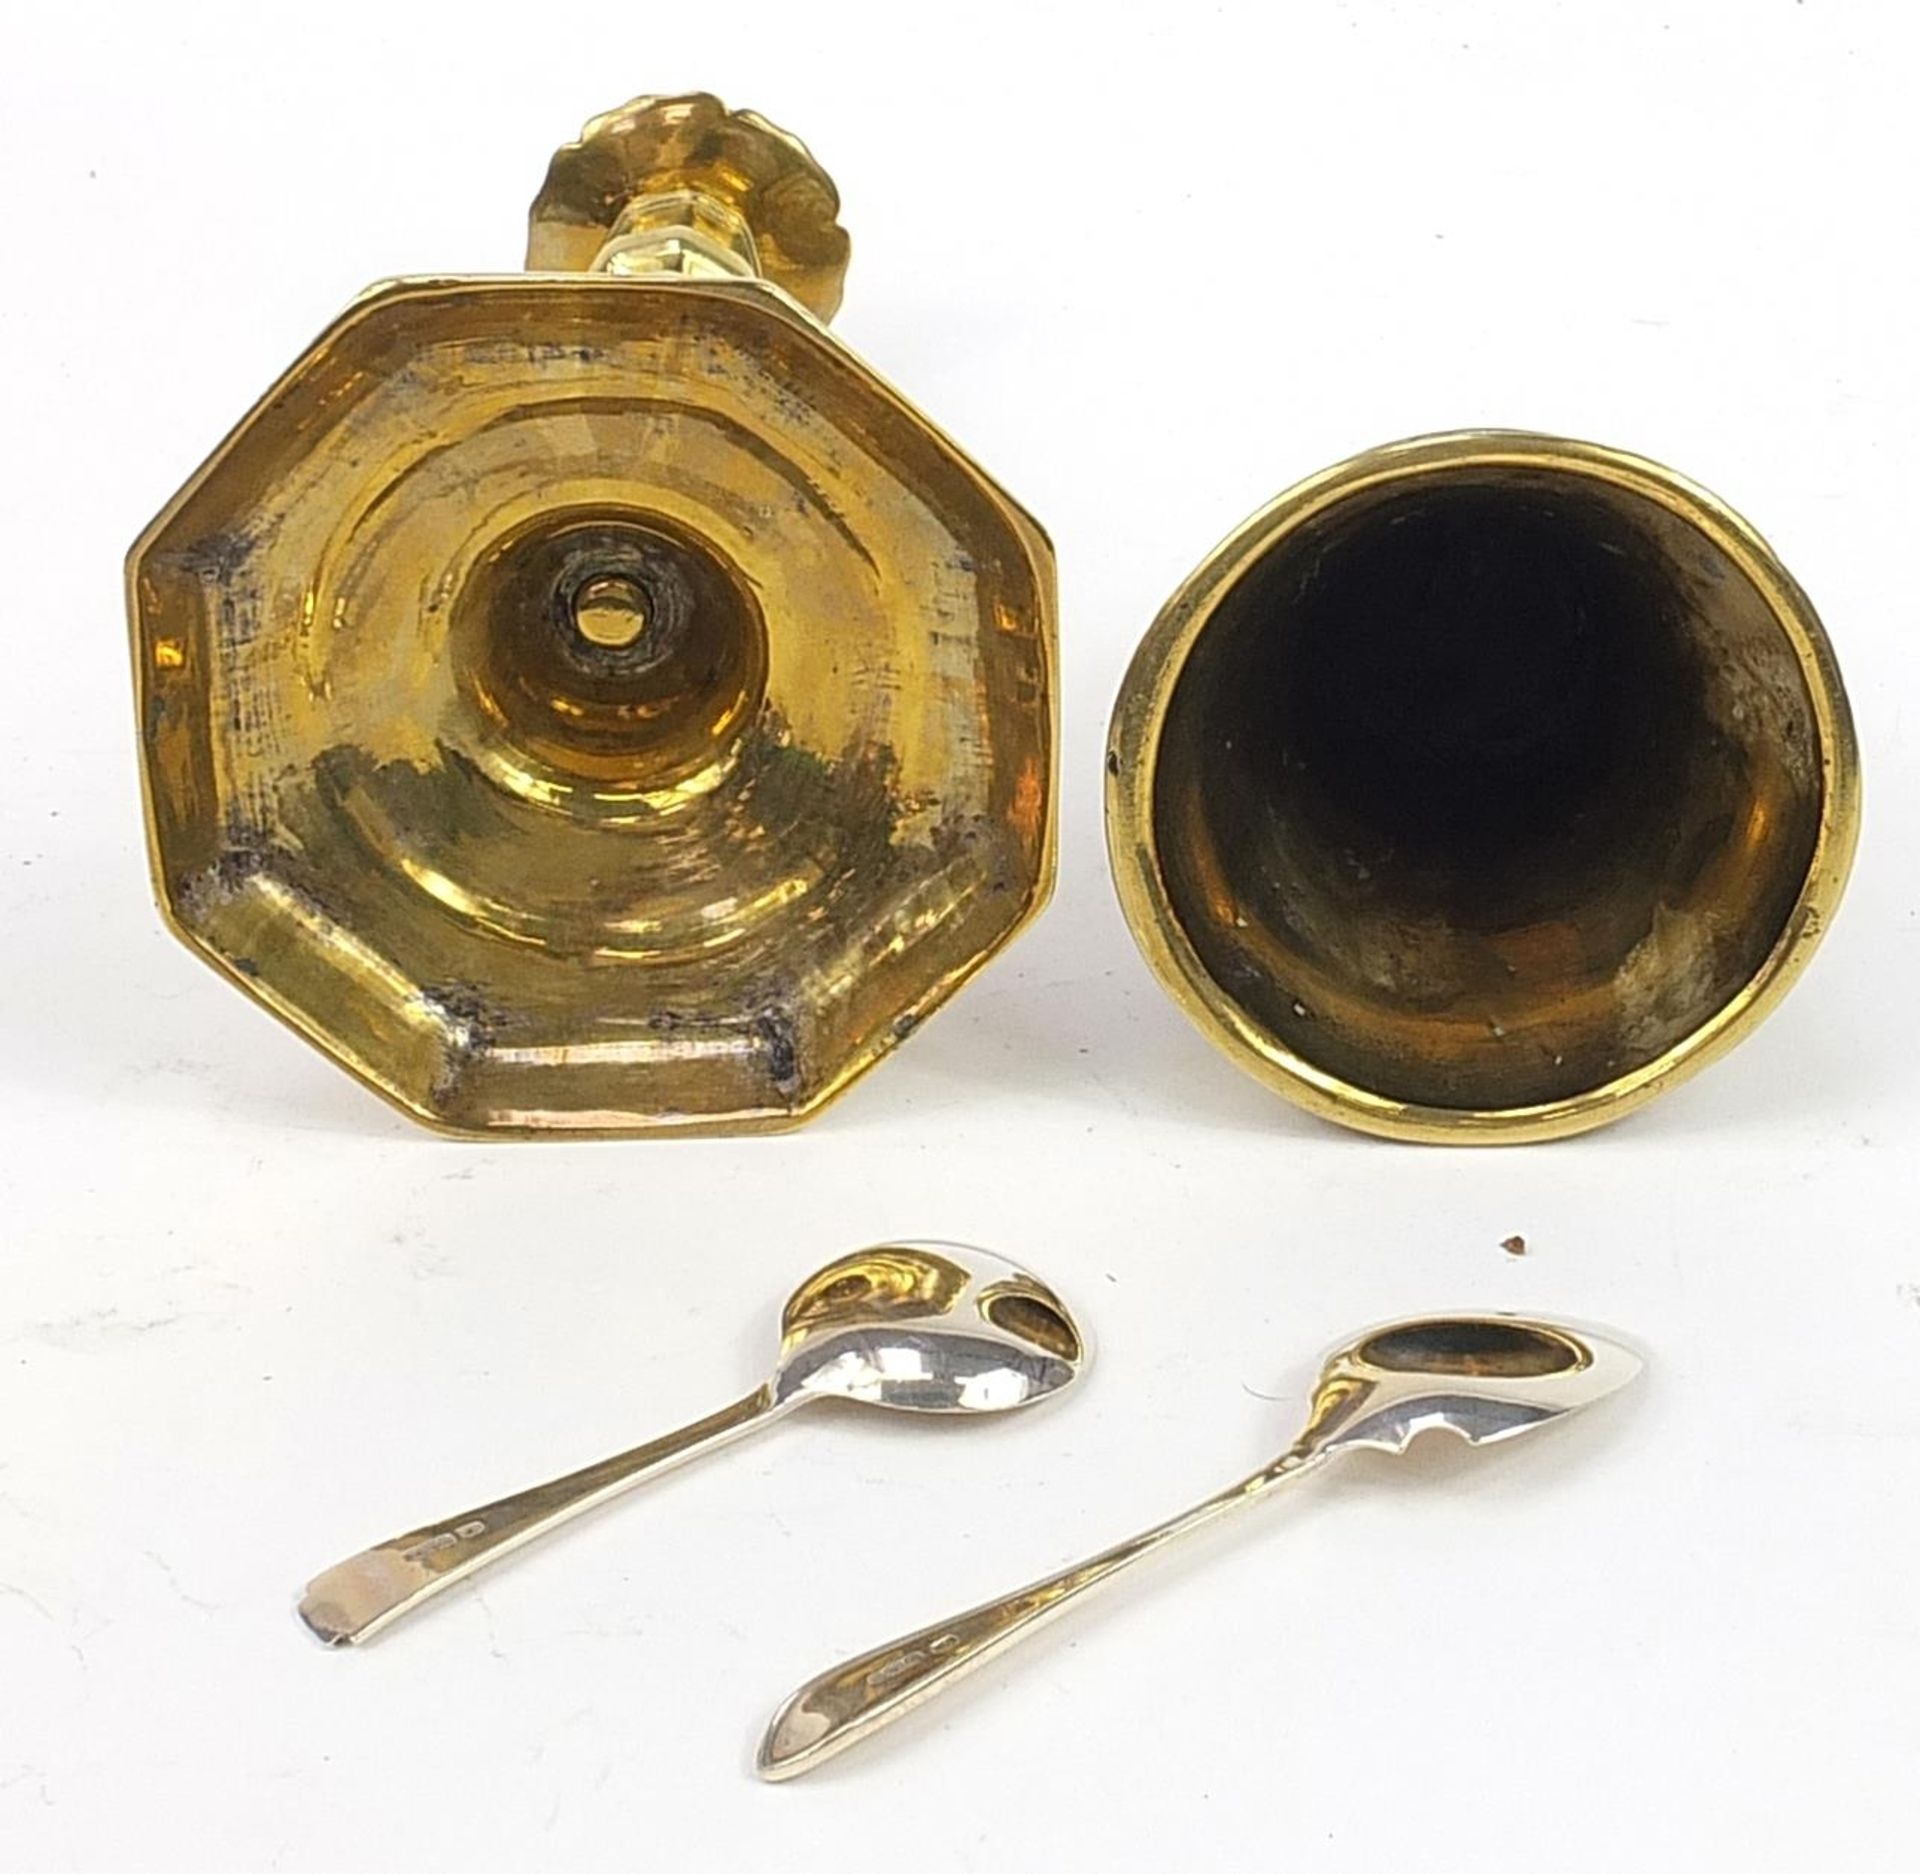 Metalware comprising a heavy gilt brass bell, candlestick and two silver spoons, the largest 23cm - Image 3 of 4